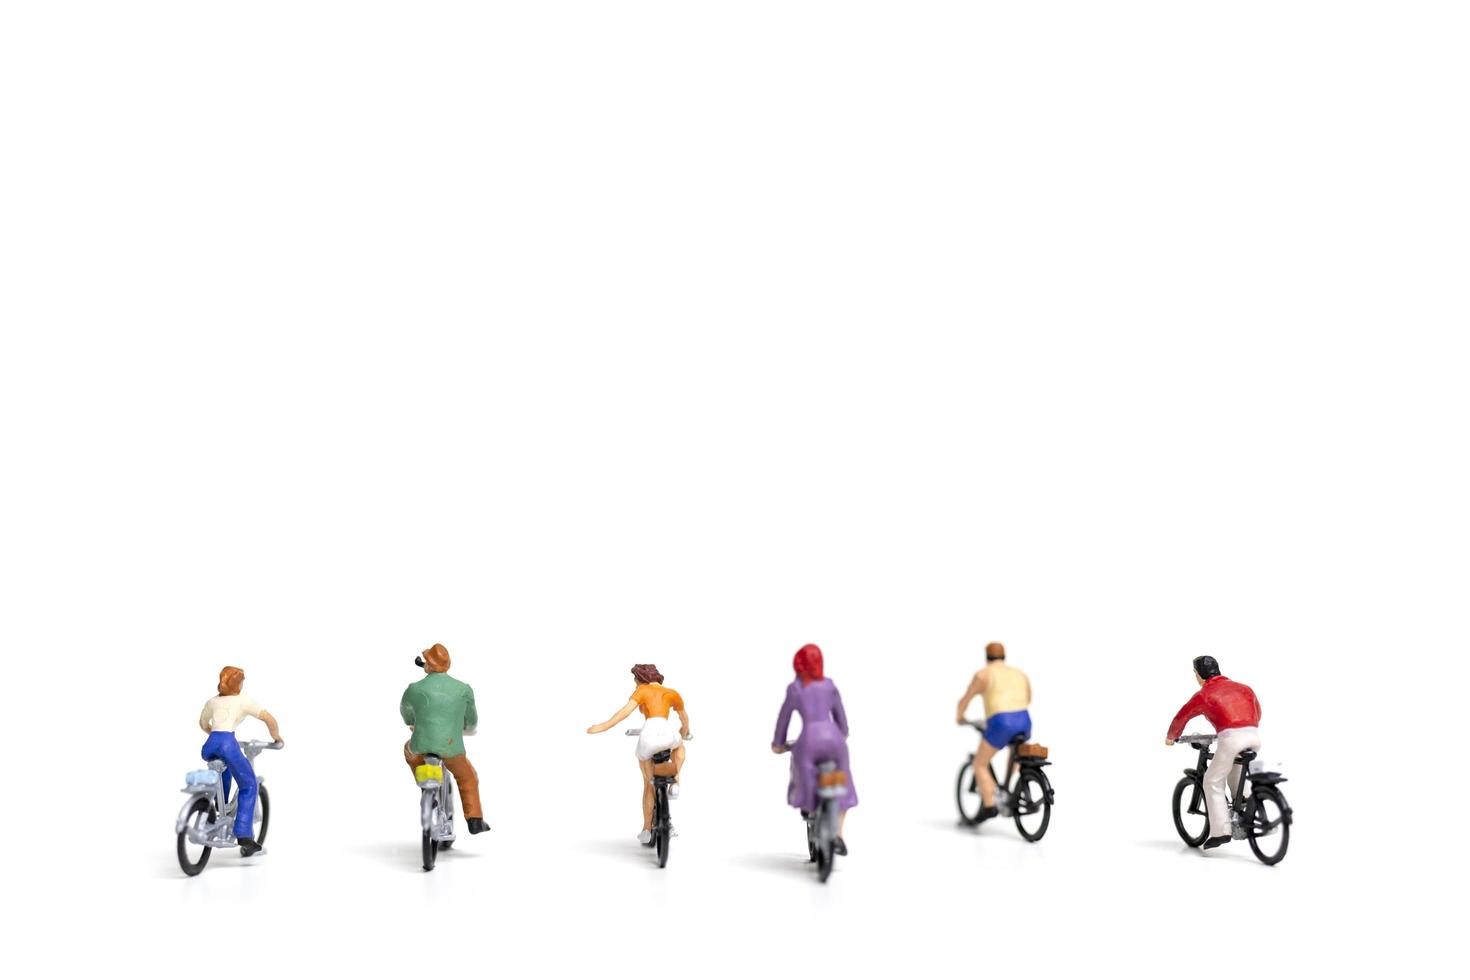 Miniature friends riding bicycles isolated on a white background, travel concept photo